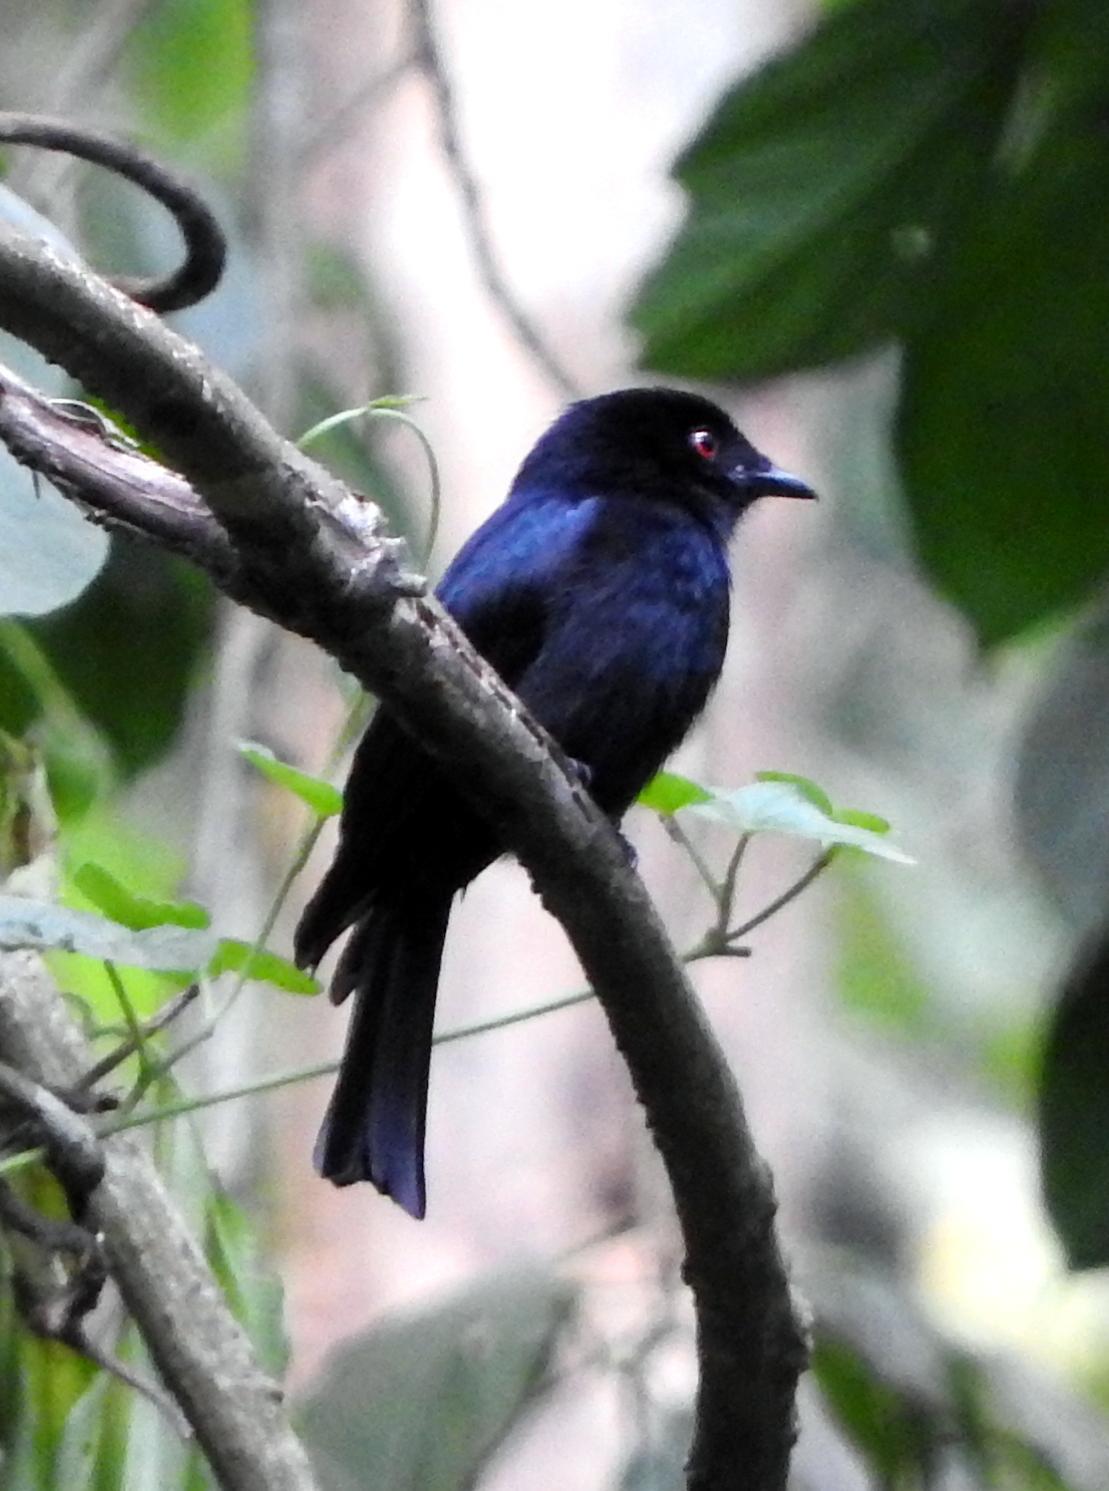 square-tailed drongo sp. Photo by Todd A. Watkins